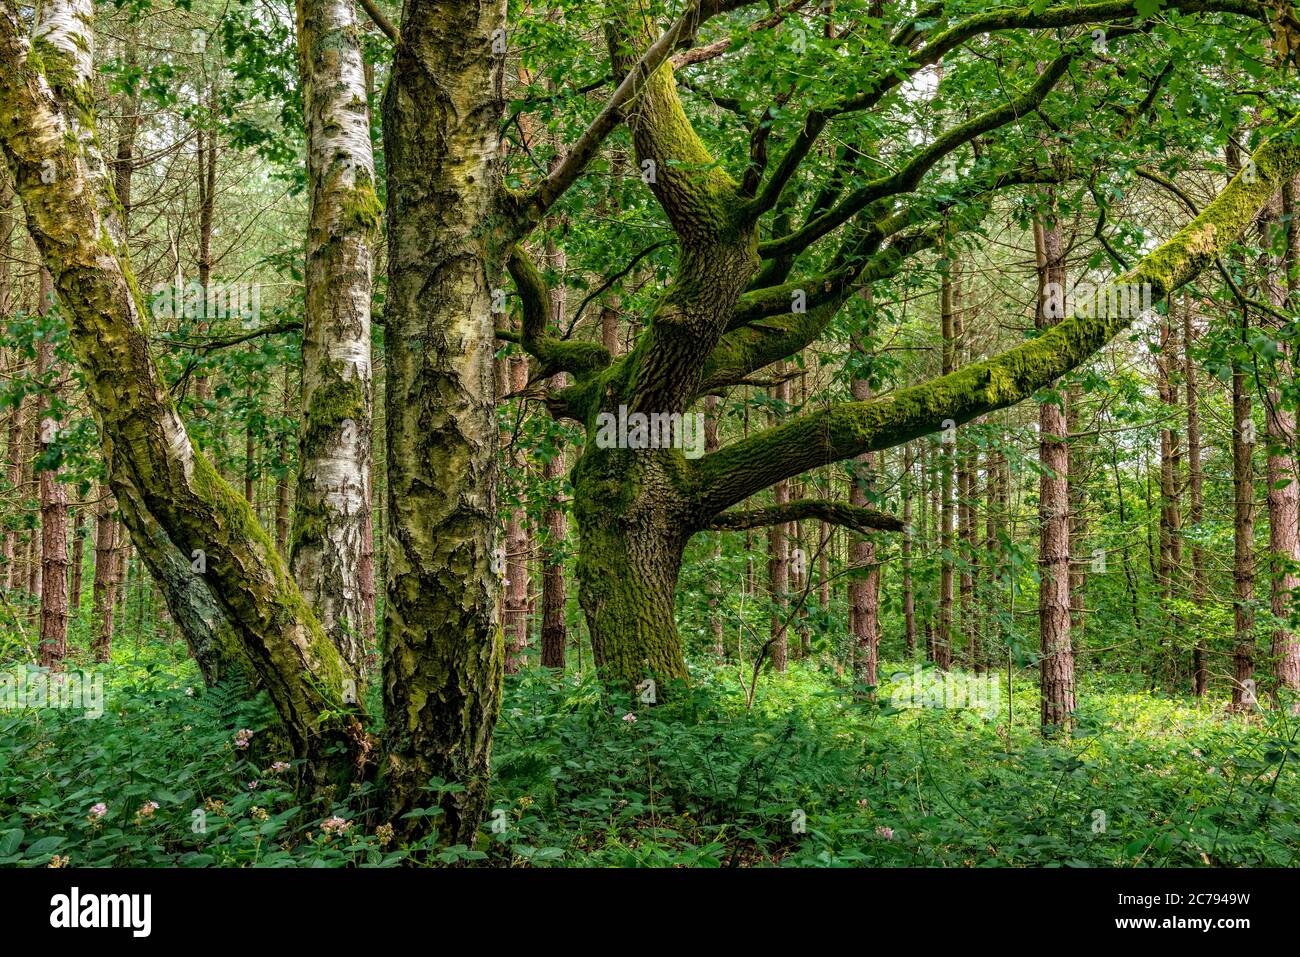 Old growth forest,Blidworth woods,Nottinghamshire,England,UK Stock Photo